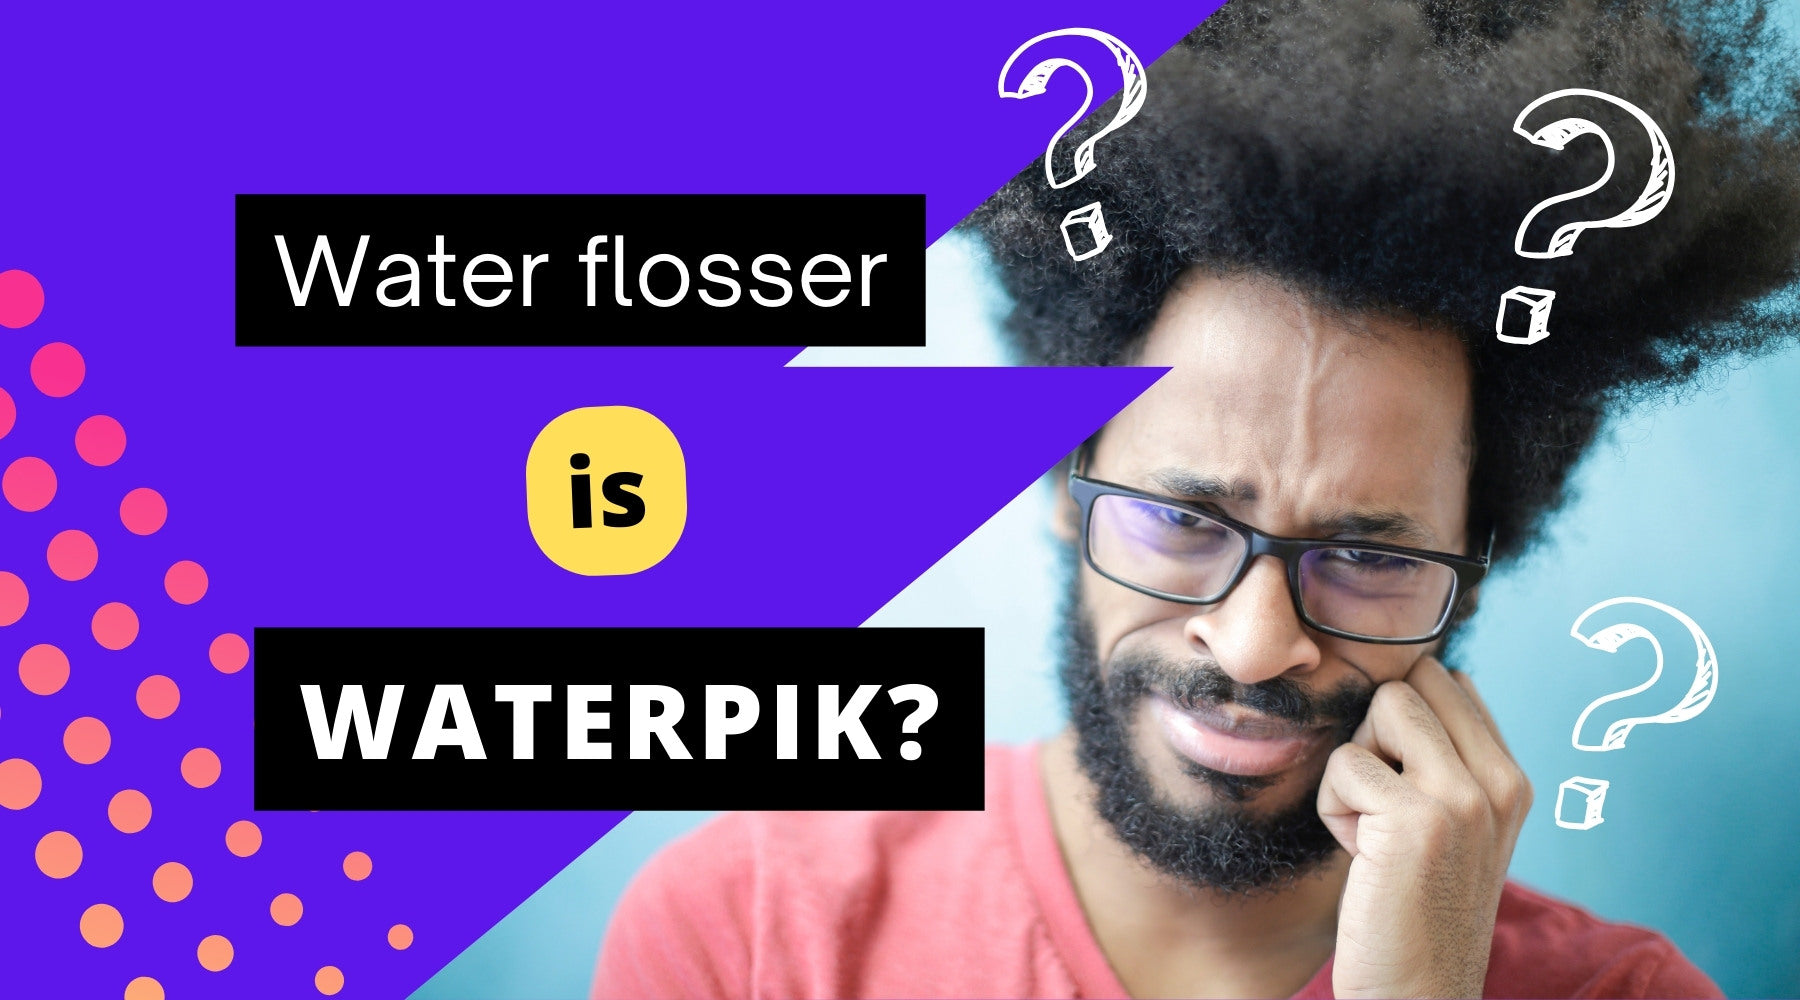 The image of the man looking puzzled aligns well with the theme of confusion between "Waterpik" and "water flosser."